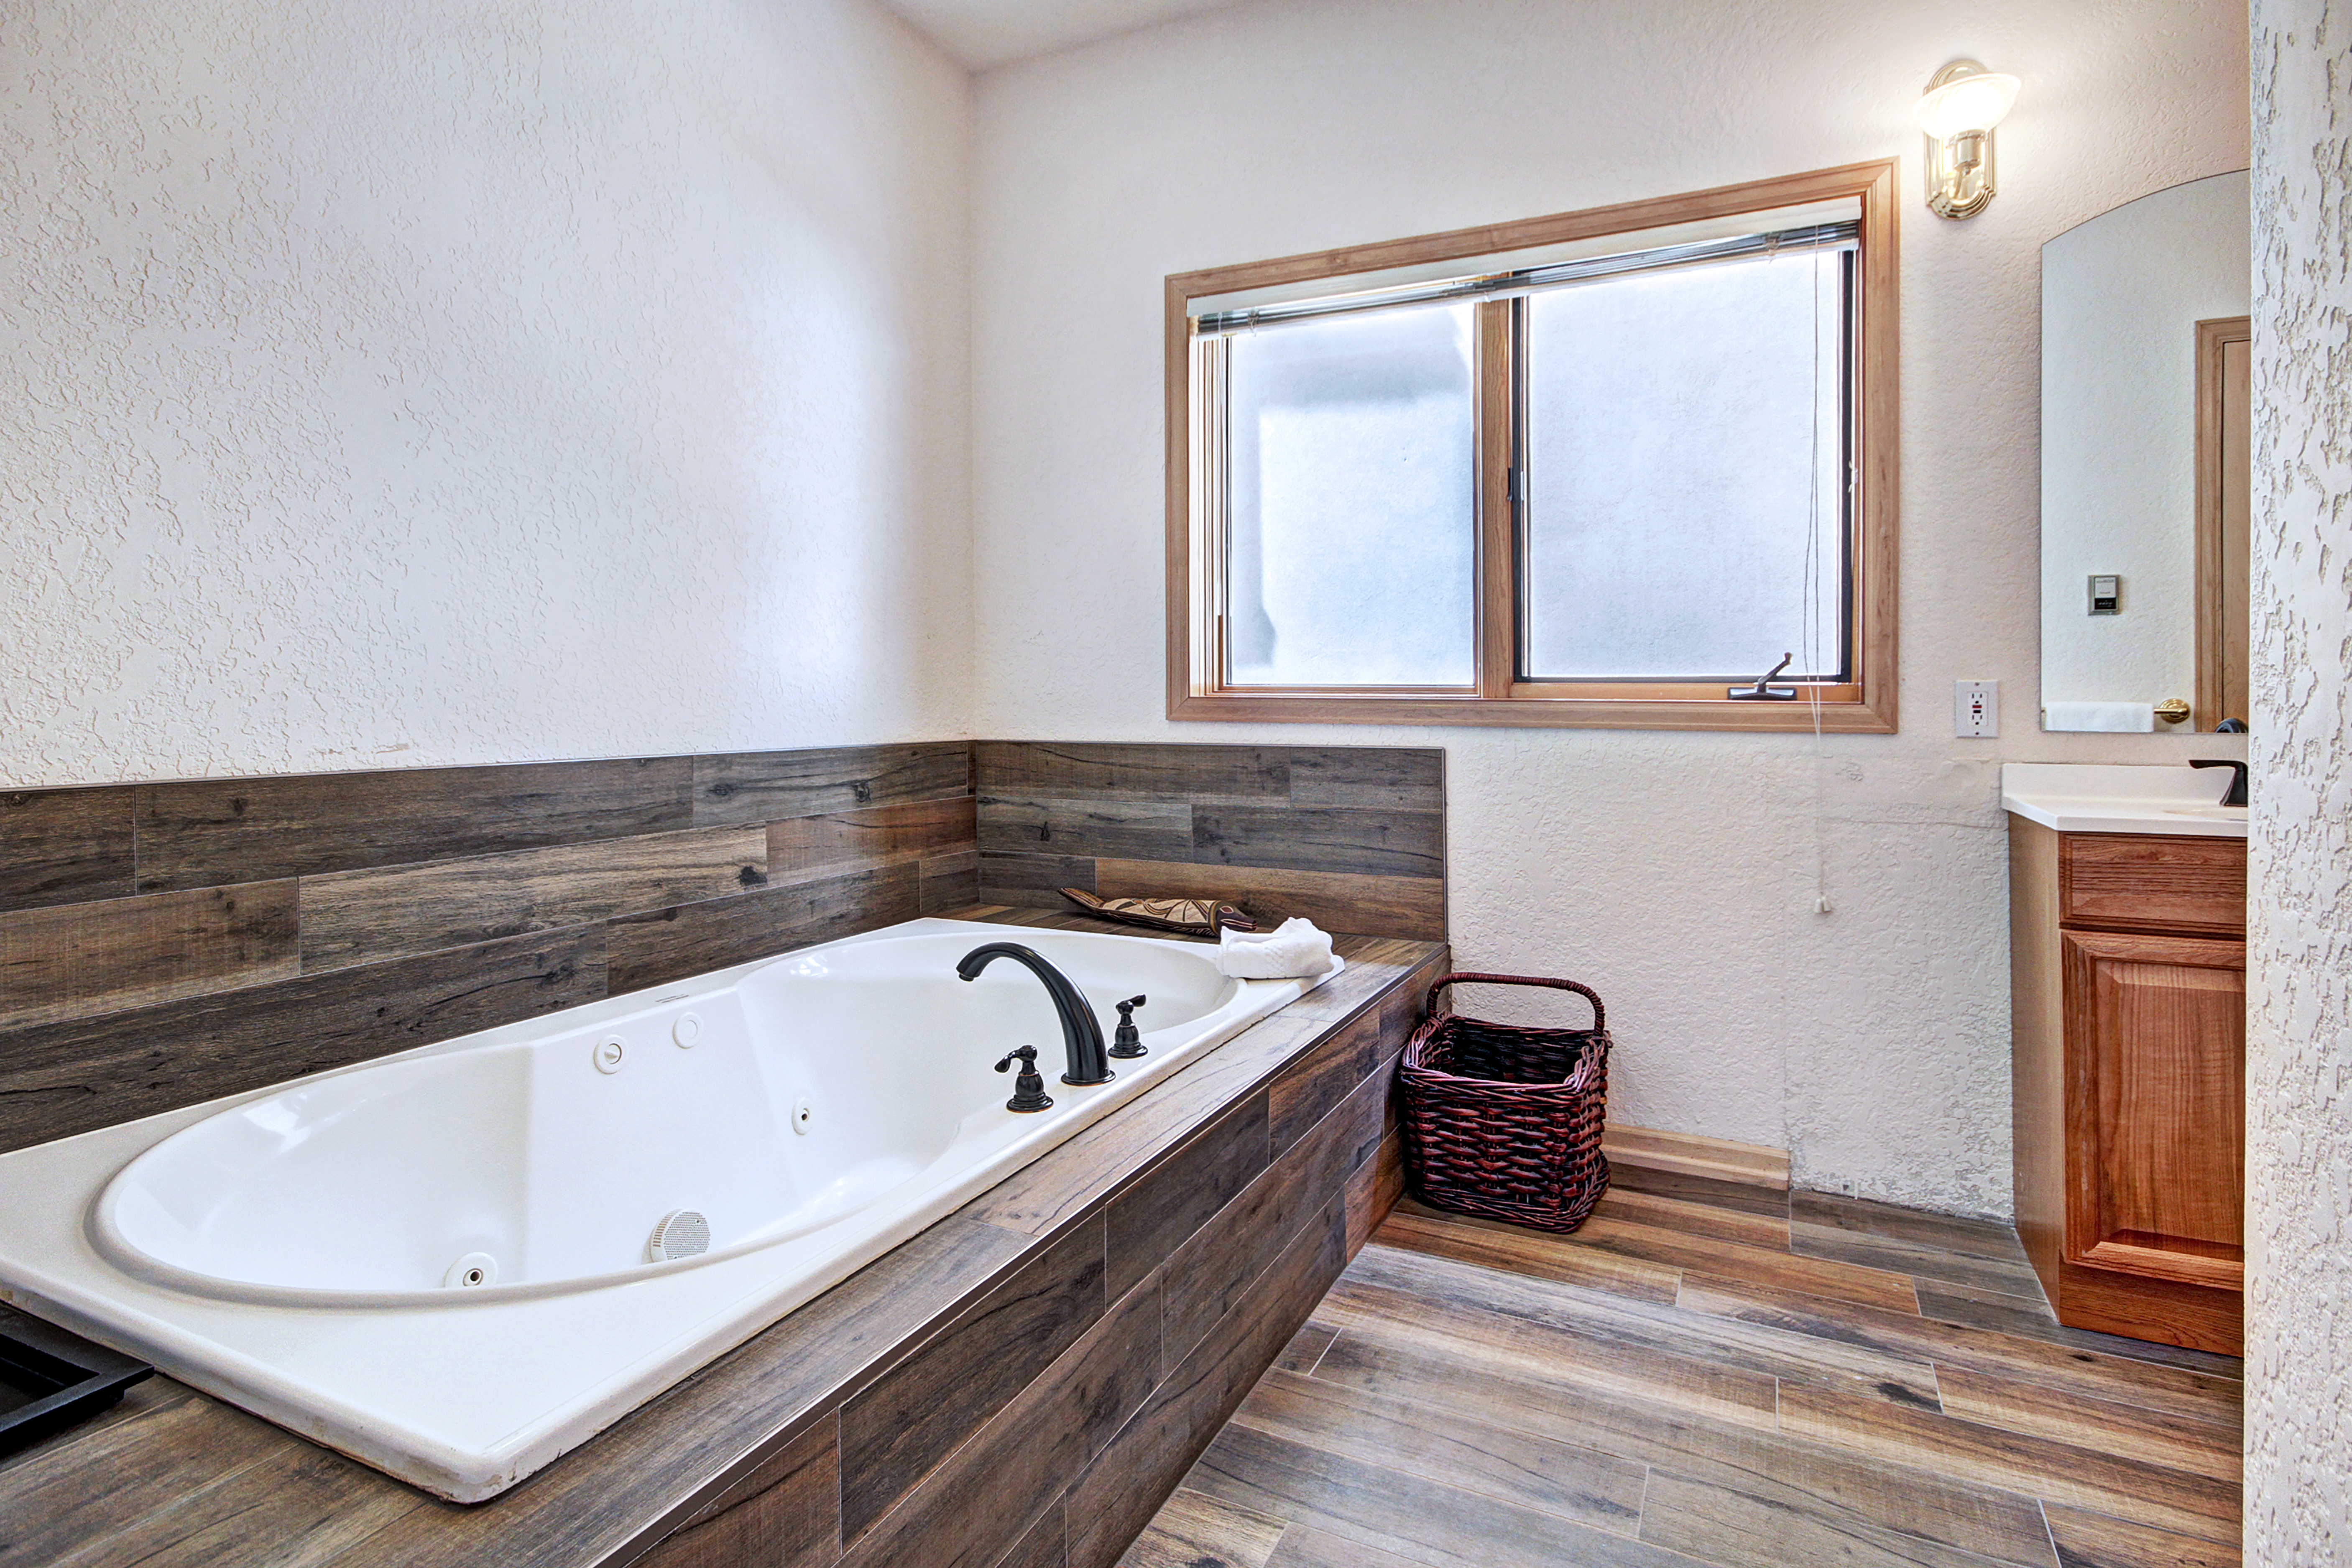 Master private bath with large jetted bathtub for soothing sore muscles.